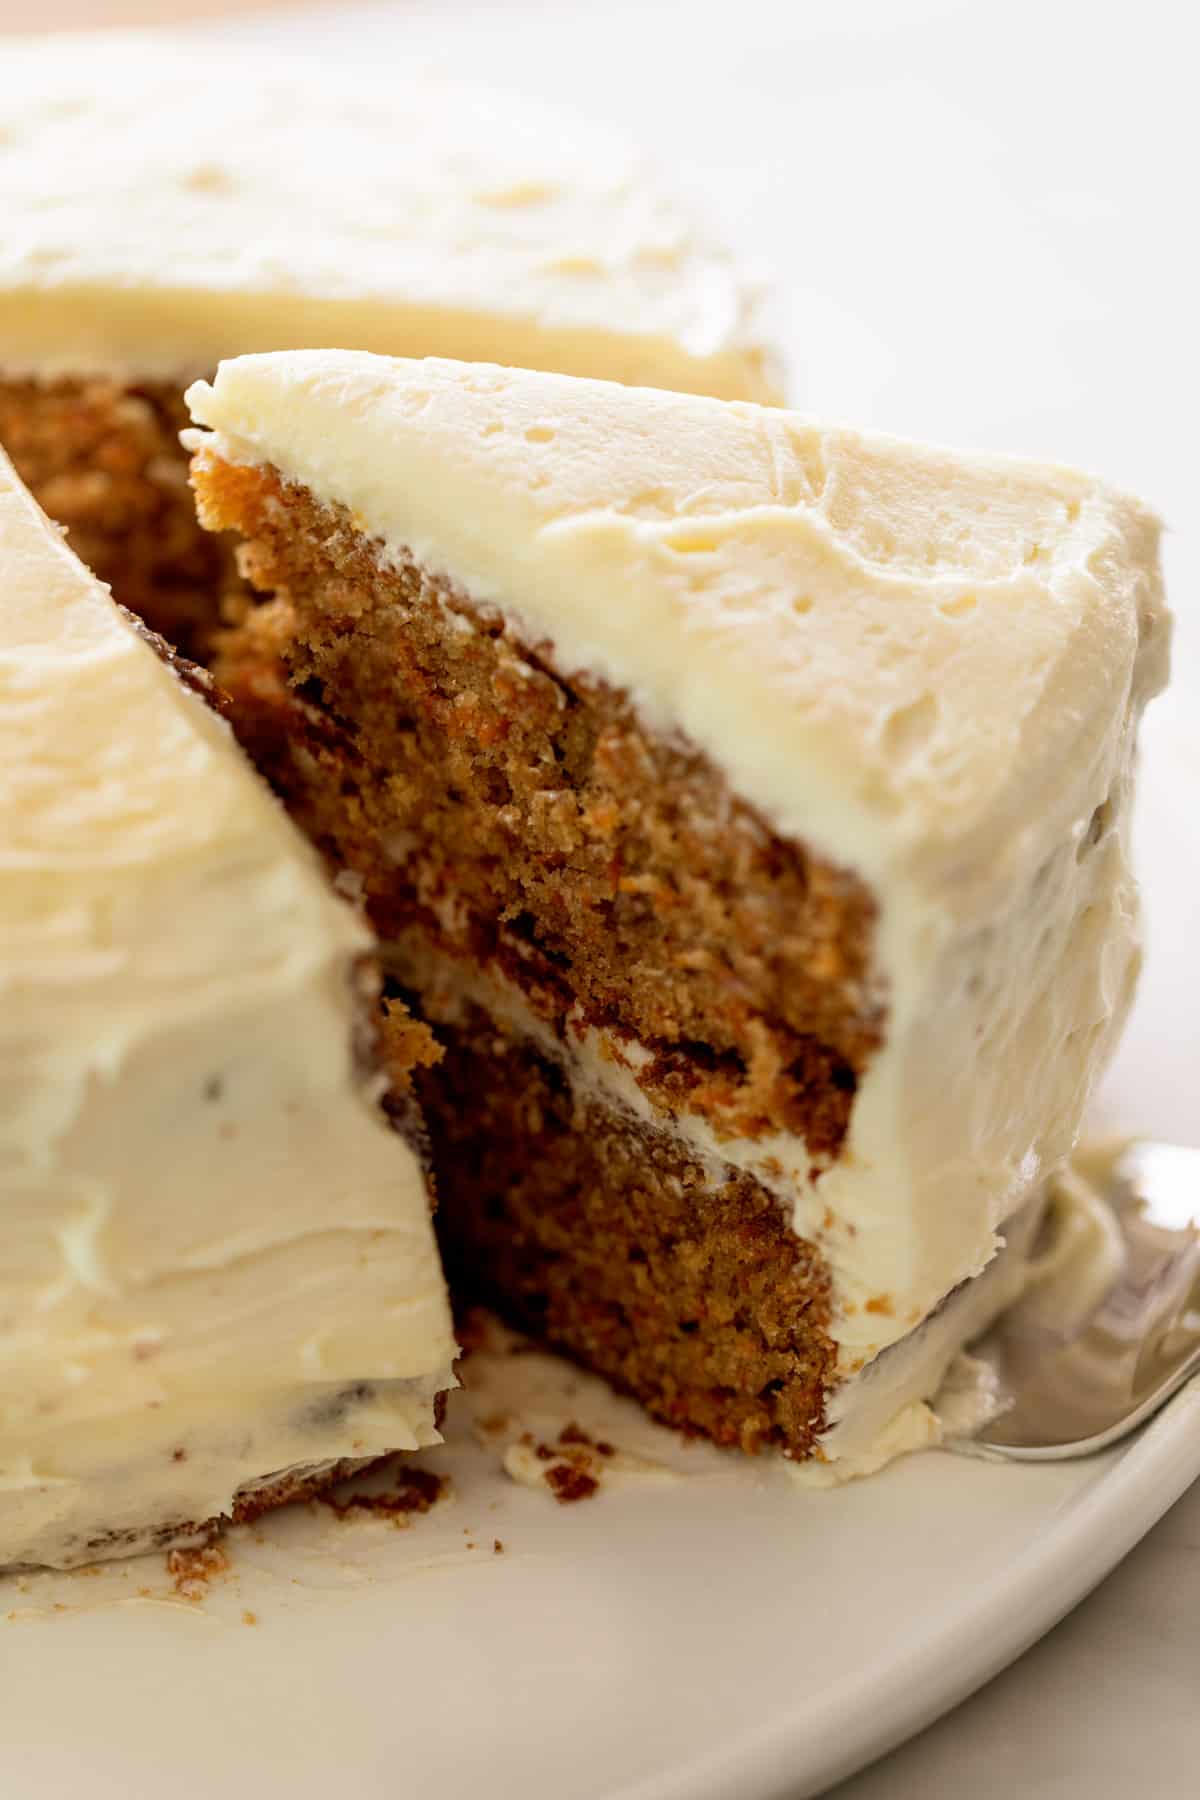 Smooth Carrot Cake with Cream Cheese Filling - Traditional Home Baking